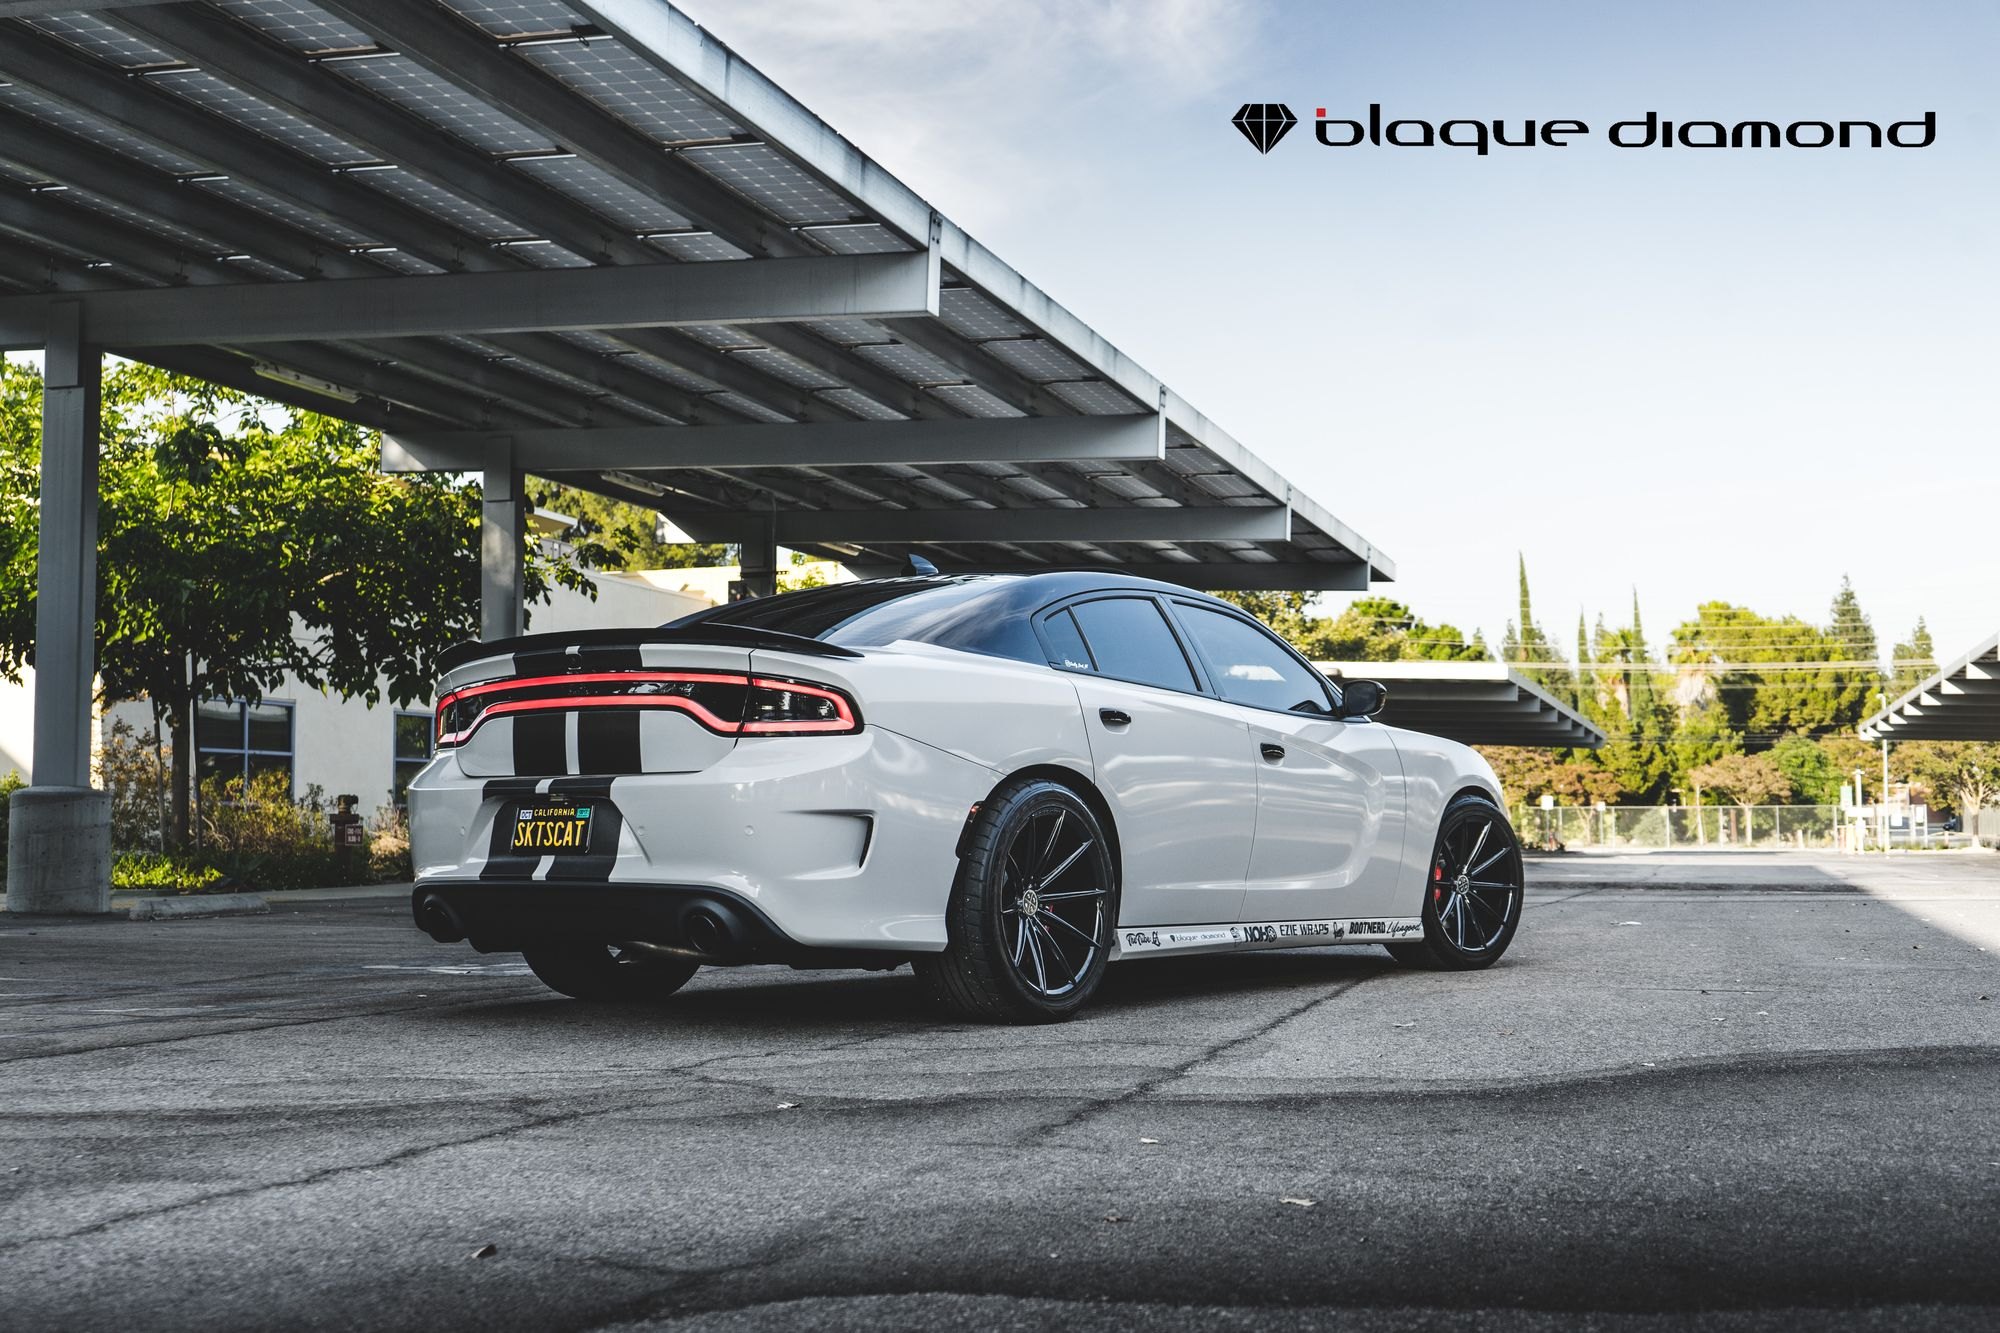 Aftermarket Rear Bumper on White Dodge Charger - Photo by Blaque Diamond